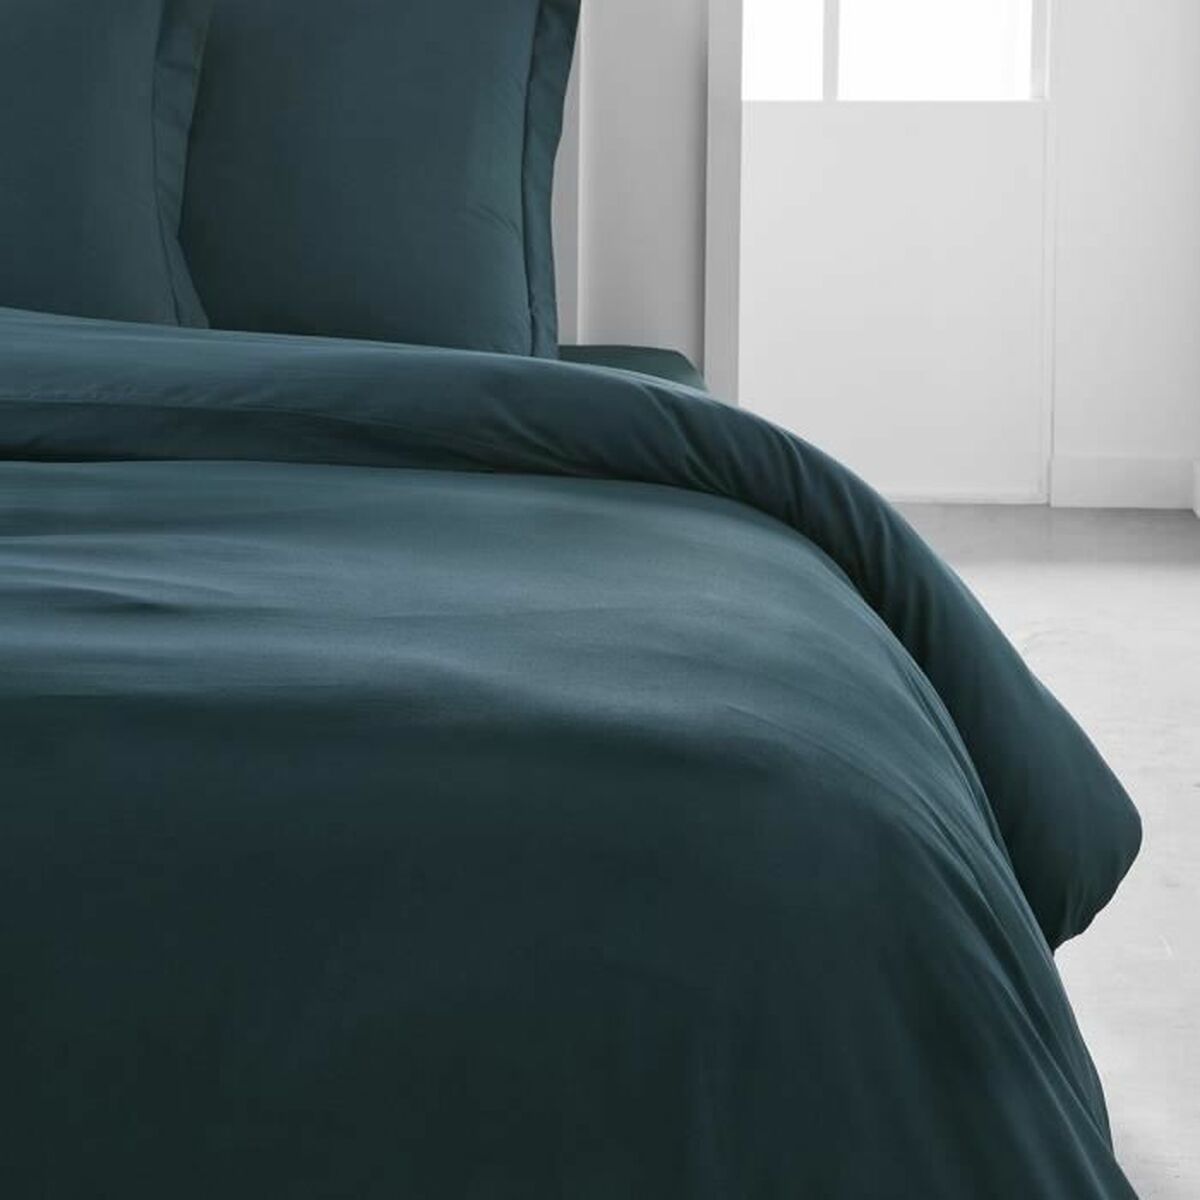 Nordic cover TODAY Essential Blue Turquoise Green 240 x 260 cm